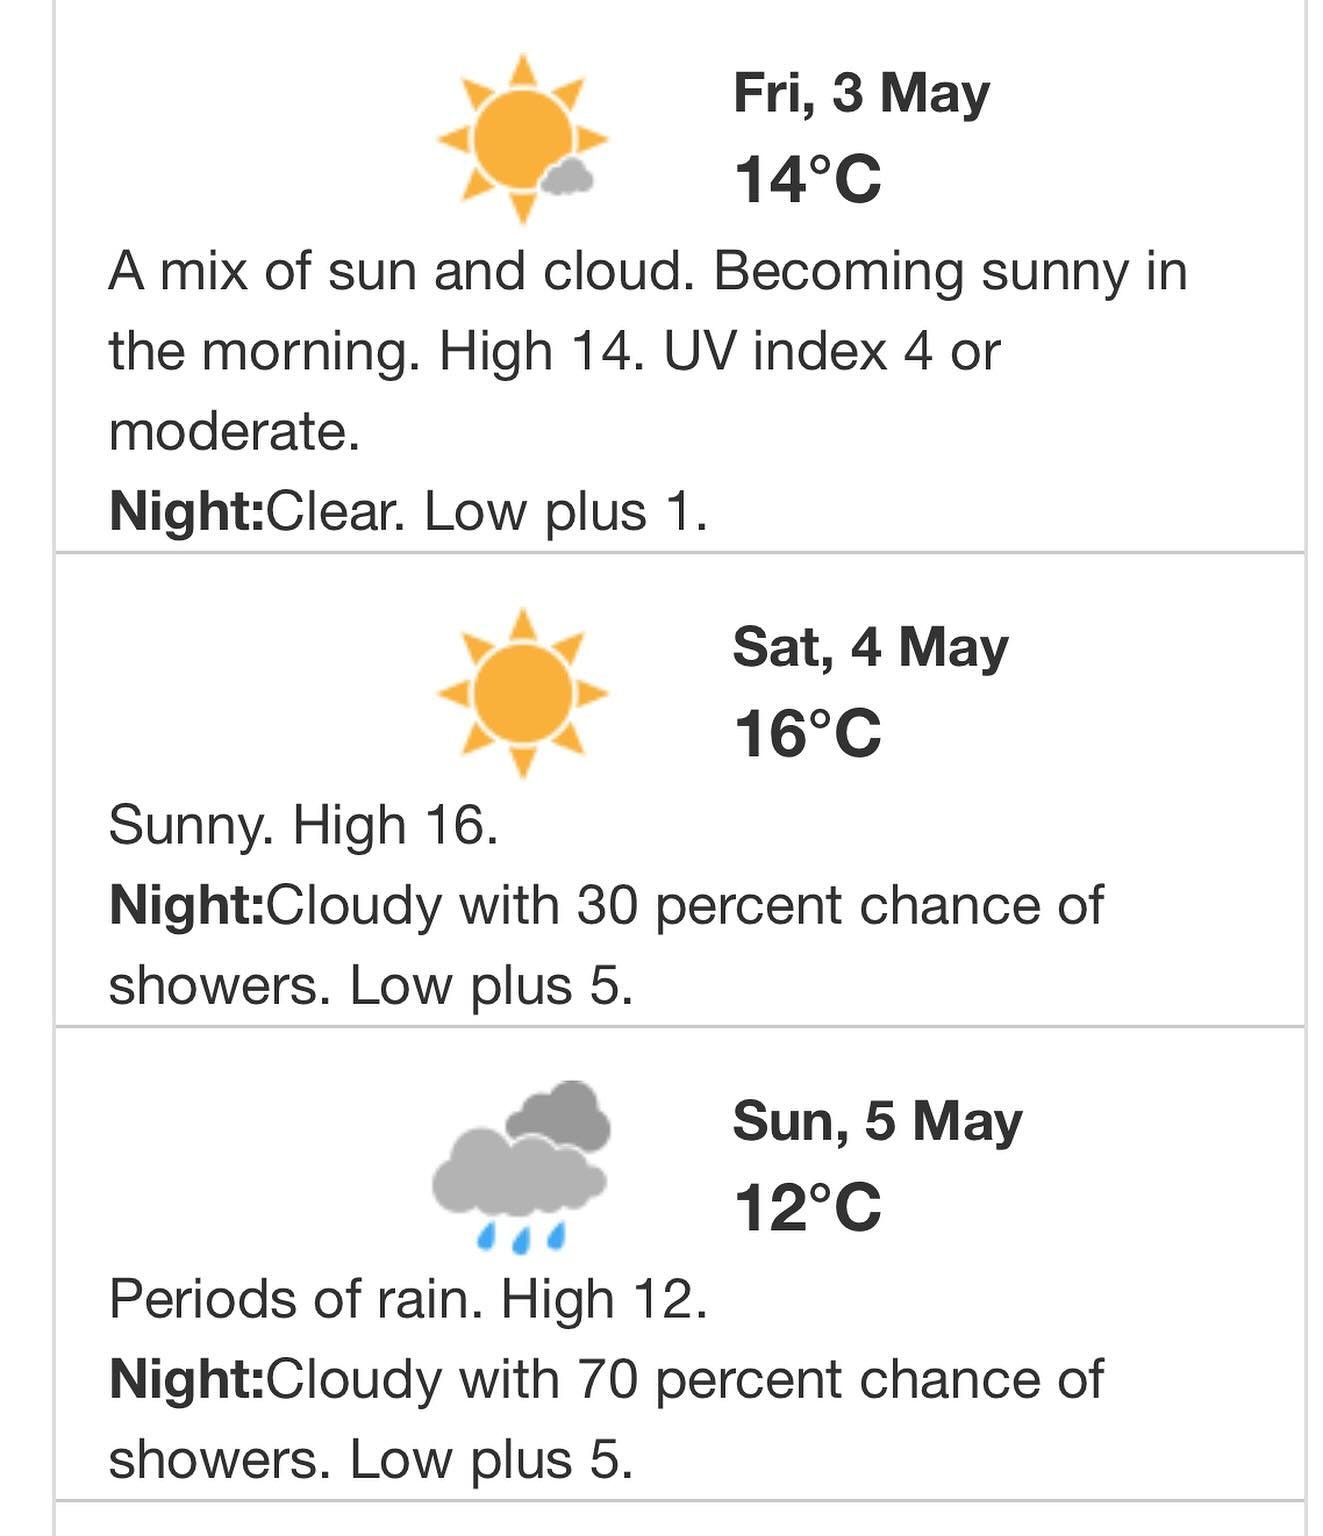 It has been a wet &amp; cold week in the Elk Valley, including the Grasmere area. But on a good note, the sun is expected to shine tomorrow &amp; Saturday. Typically the Dorr/Grasmere Motorized singletrack trails dry up quickly so it may work out awe